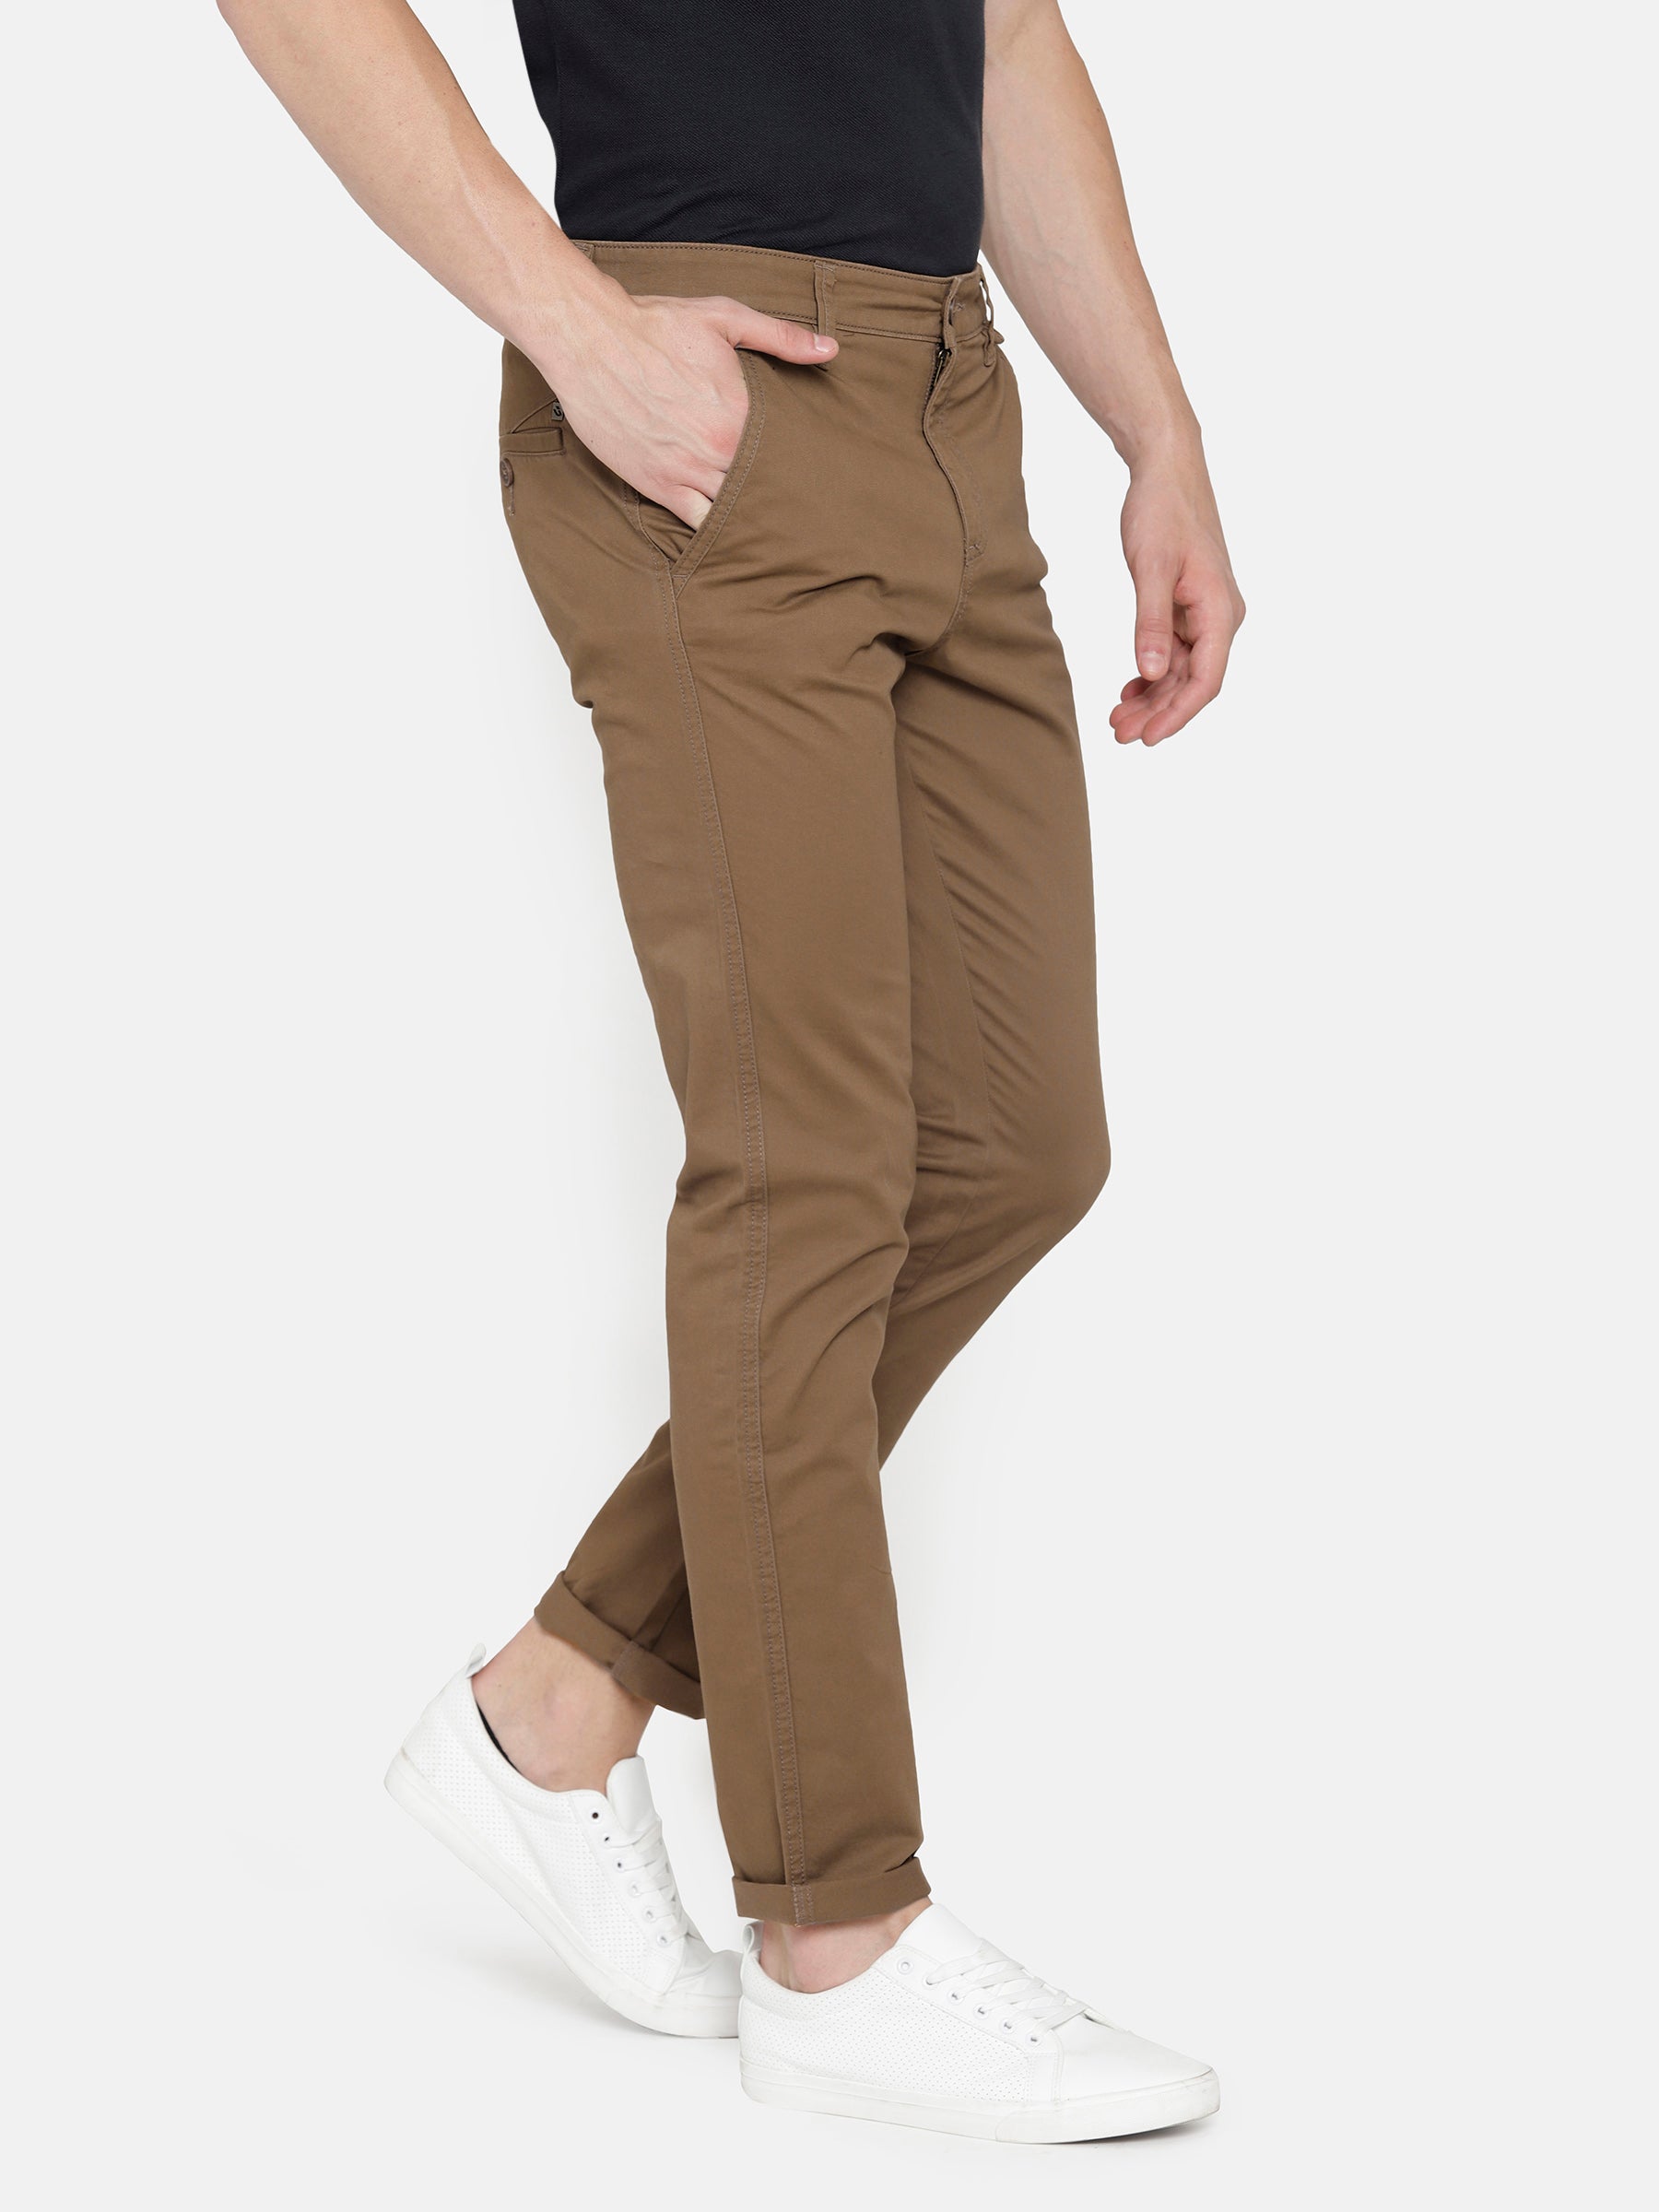 Must have formal trousers for men and women  Times of India